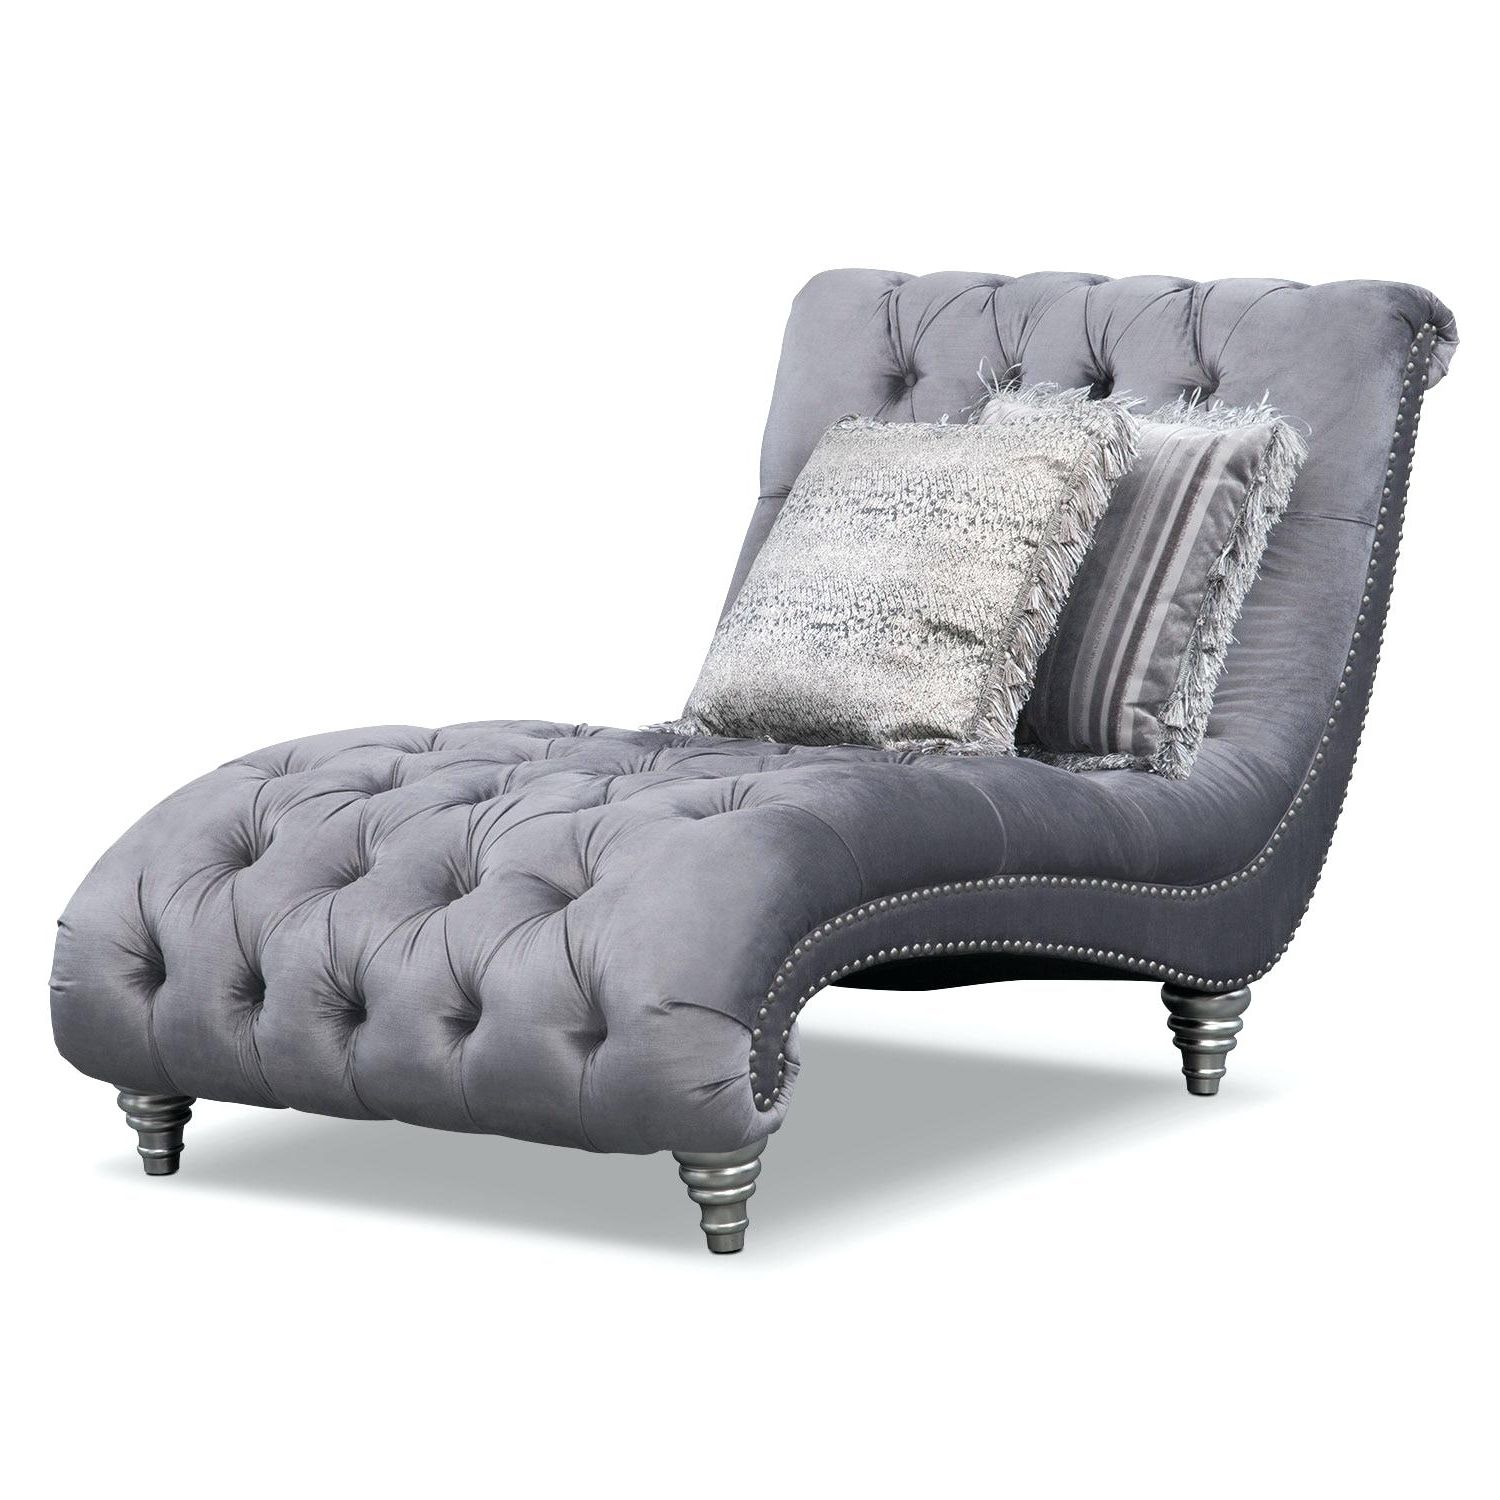 2017 Grey Chaise Lounges In Grey Chaise Lounge Chair • Lounge Chairs Ideas (View 2 of 15)